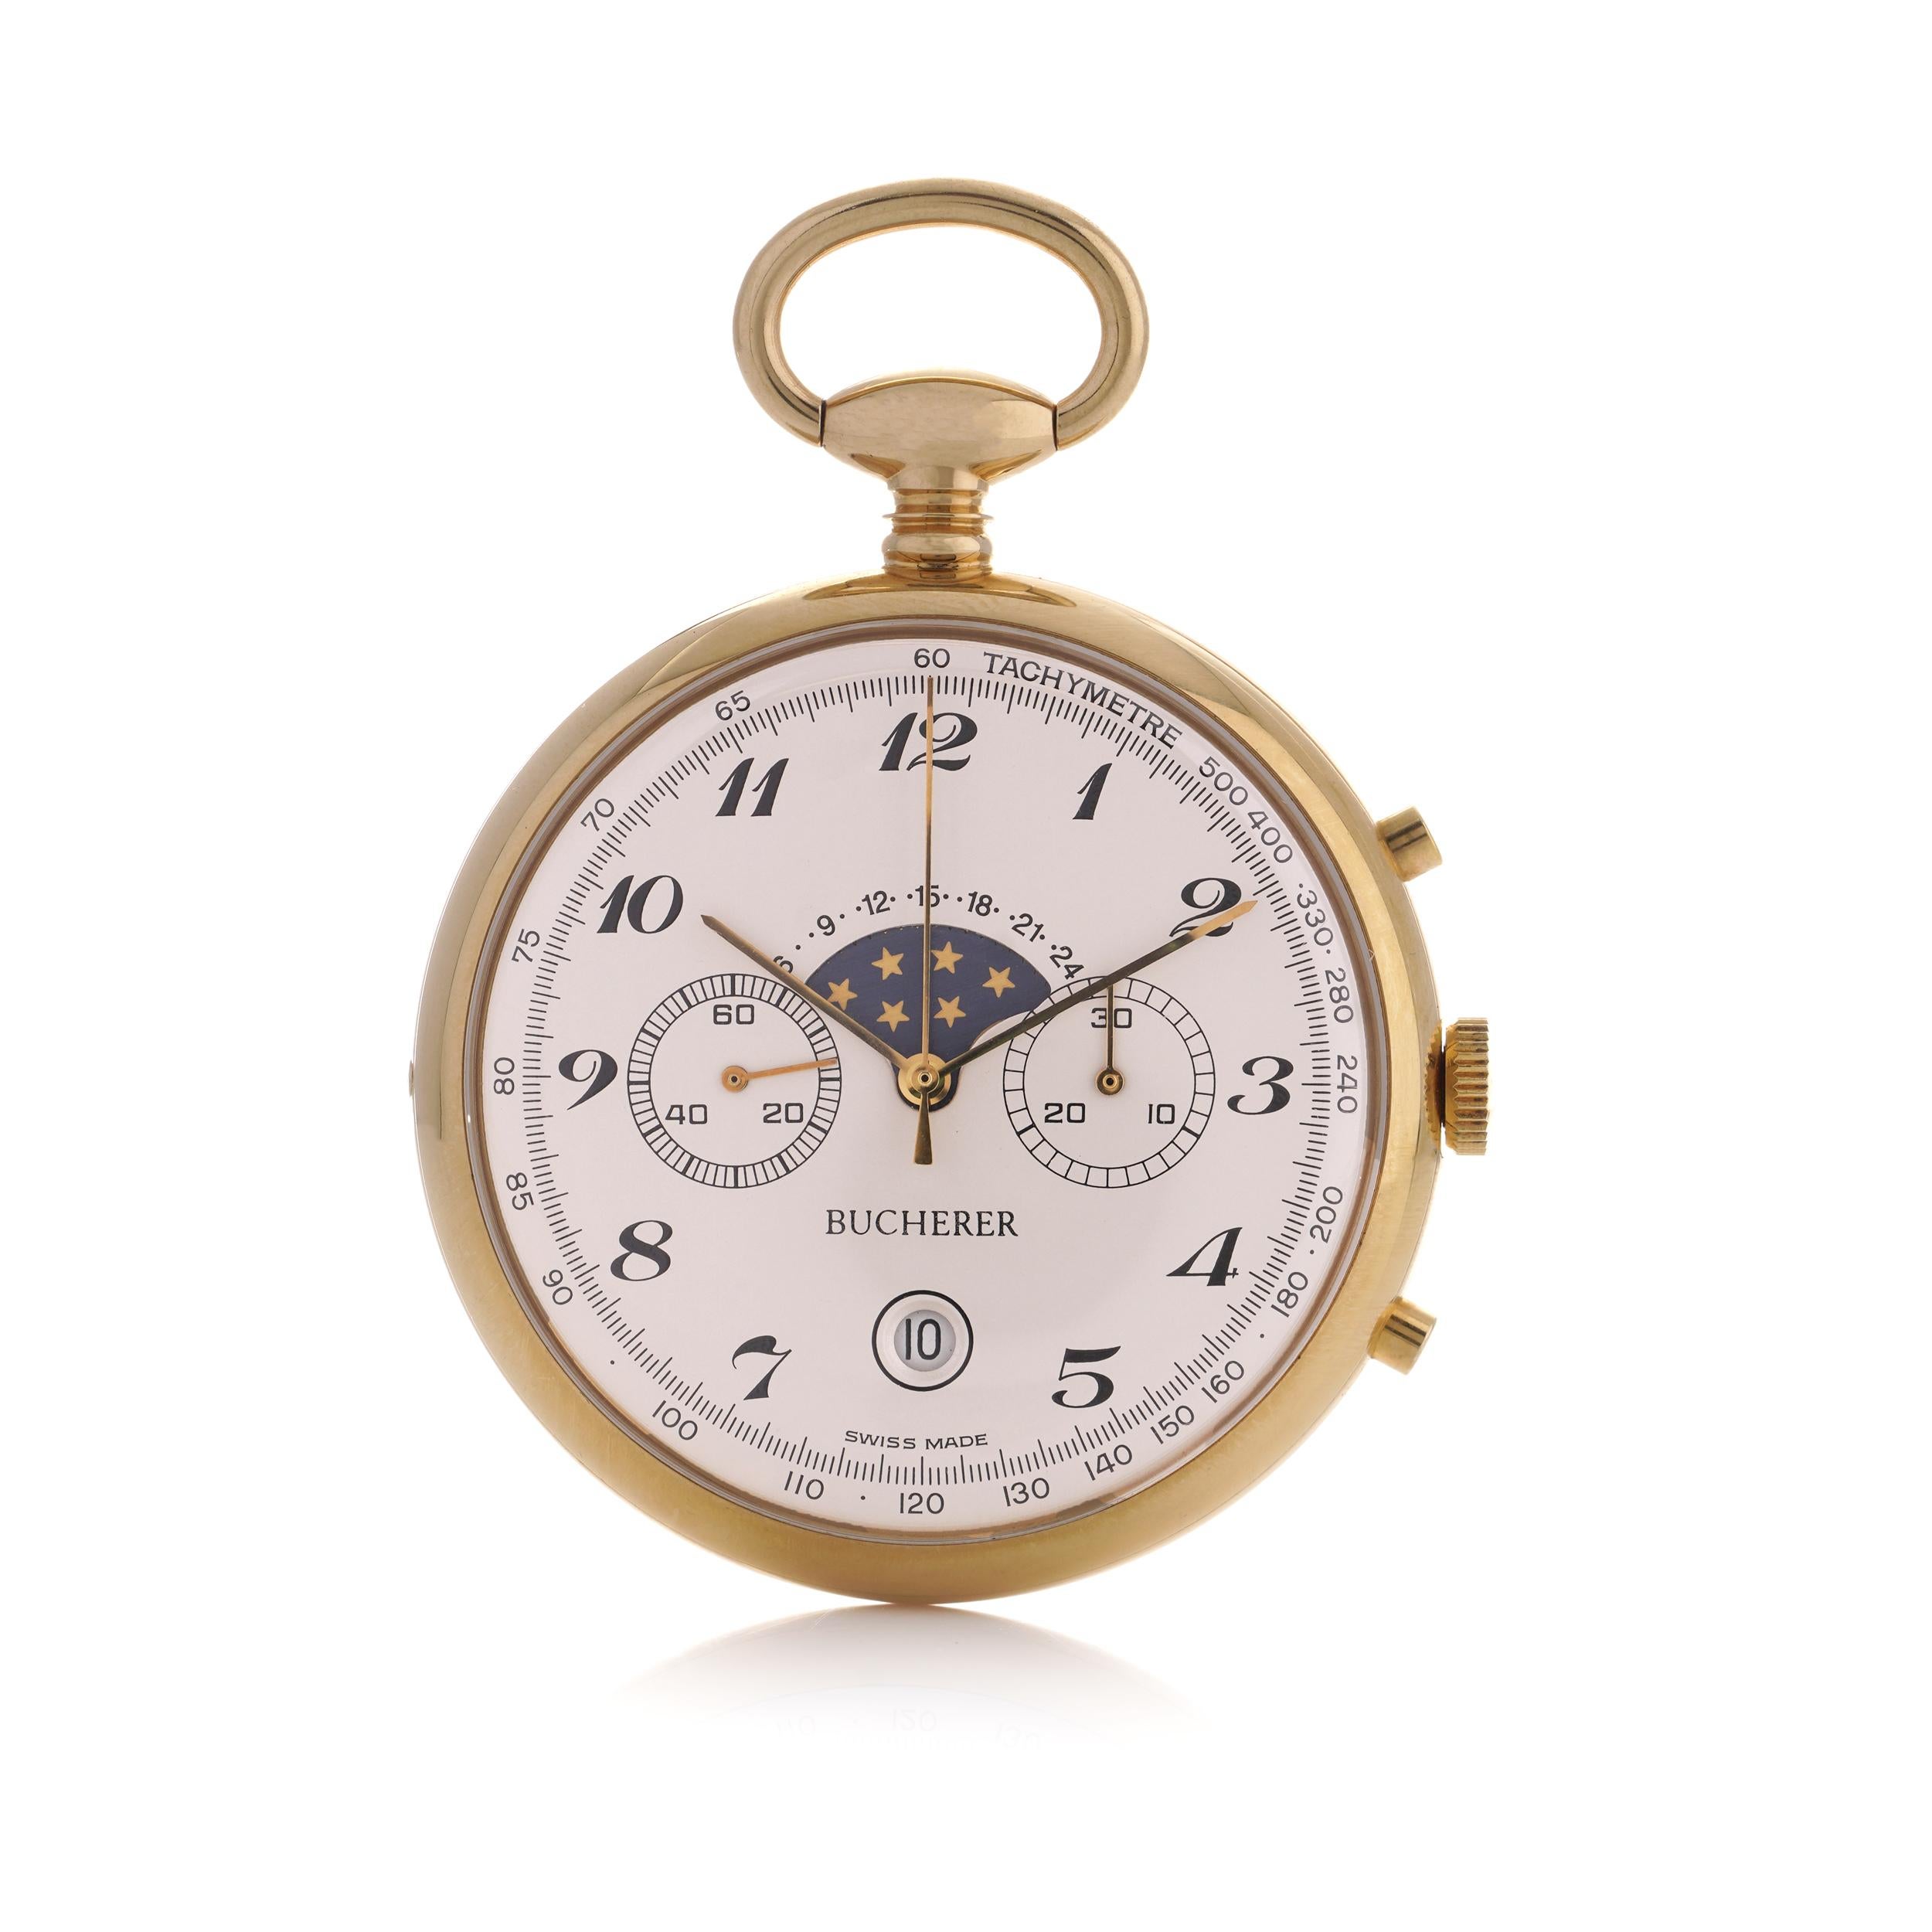 Bucherer gold-plated moon phase chronograph pocket watch.

Details:
Circa Date: After 2000
Case size: 42 mm
Style: Open Face, swing-out style case
Material: gold plated
Dial Colour: White
Dial: White enamel
Numerals: Breguet numerals
Index